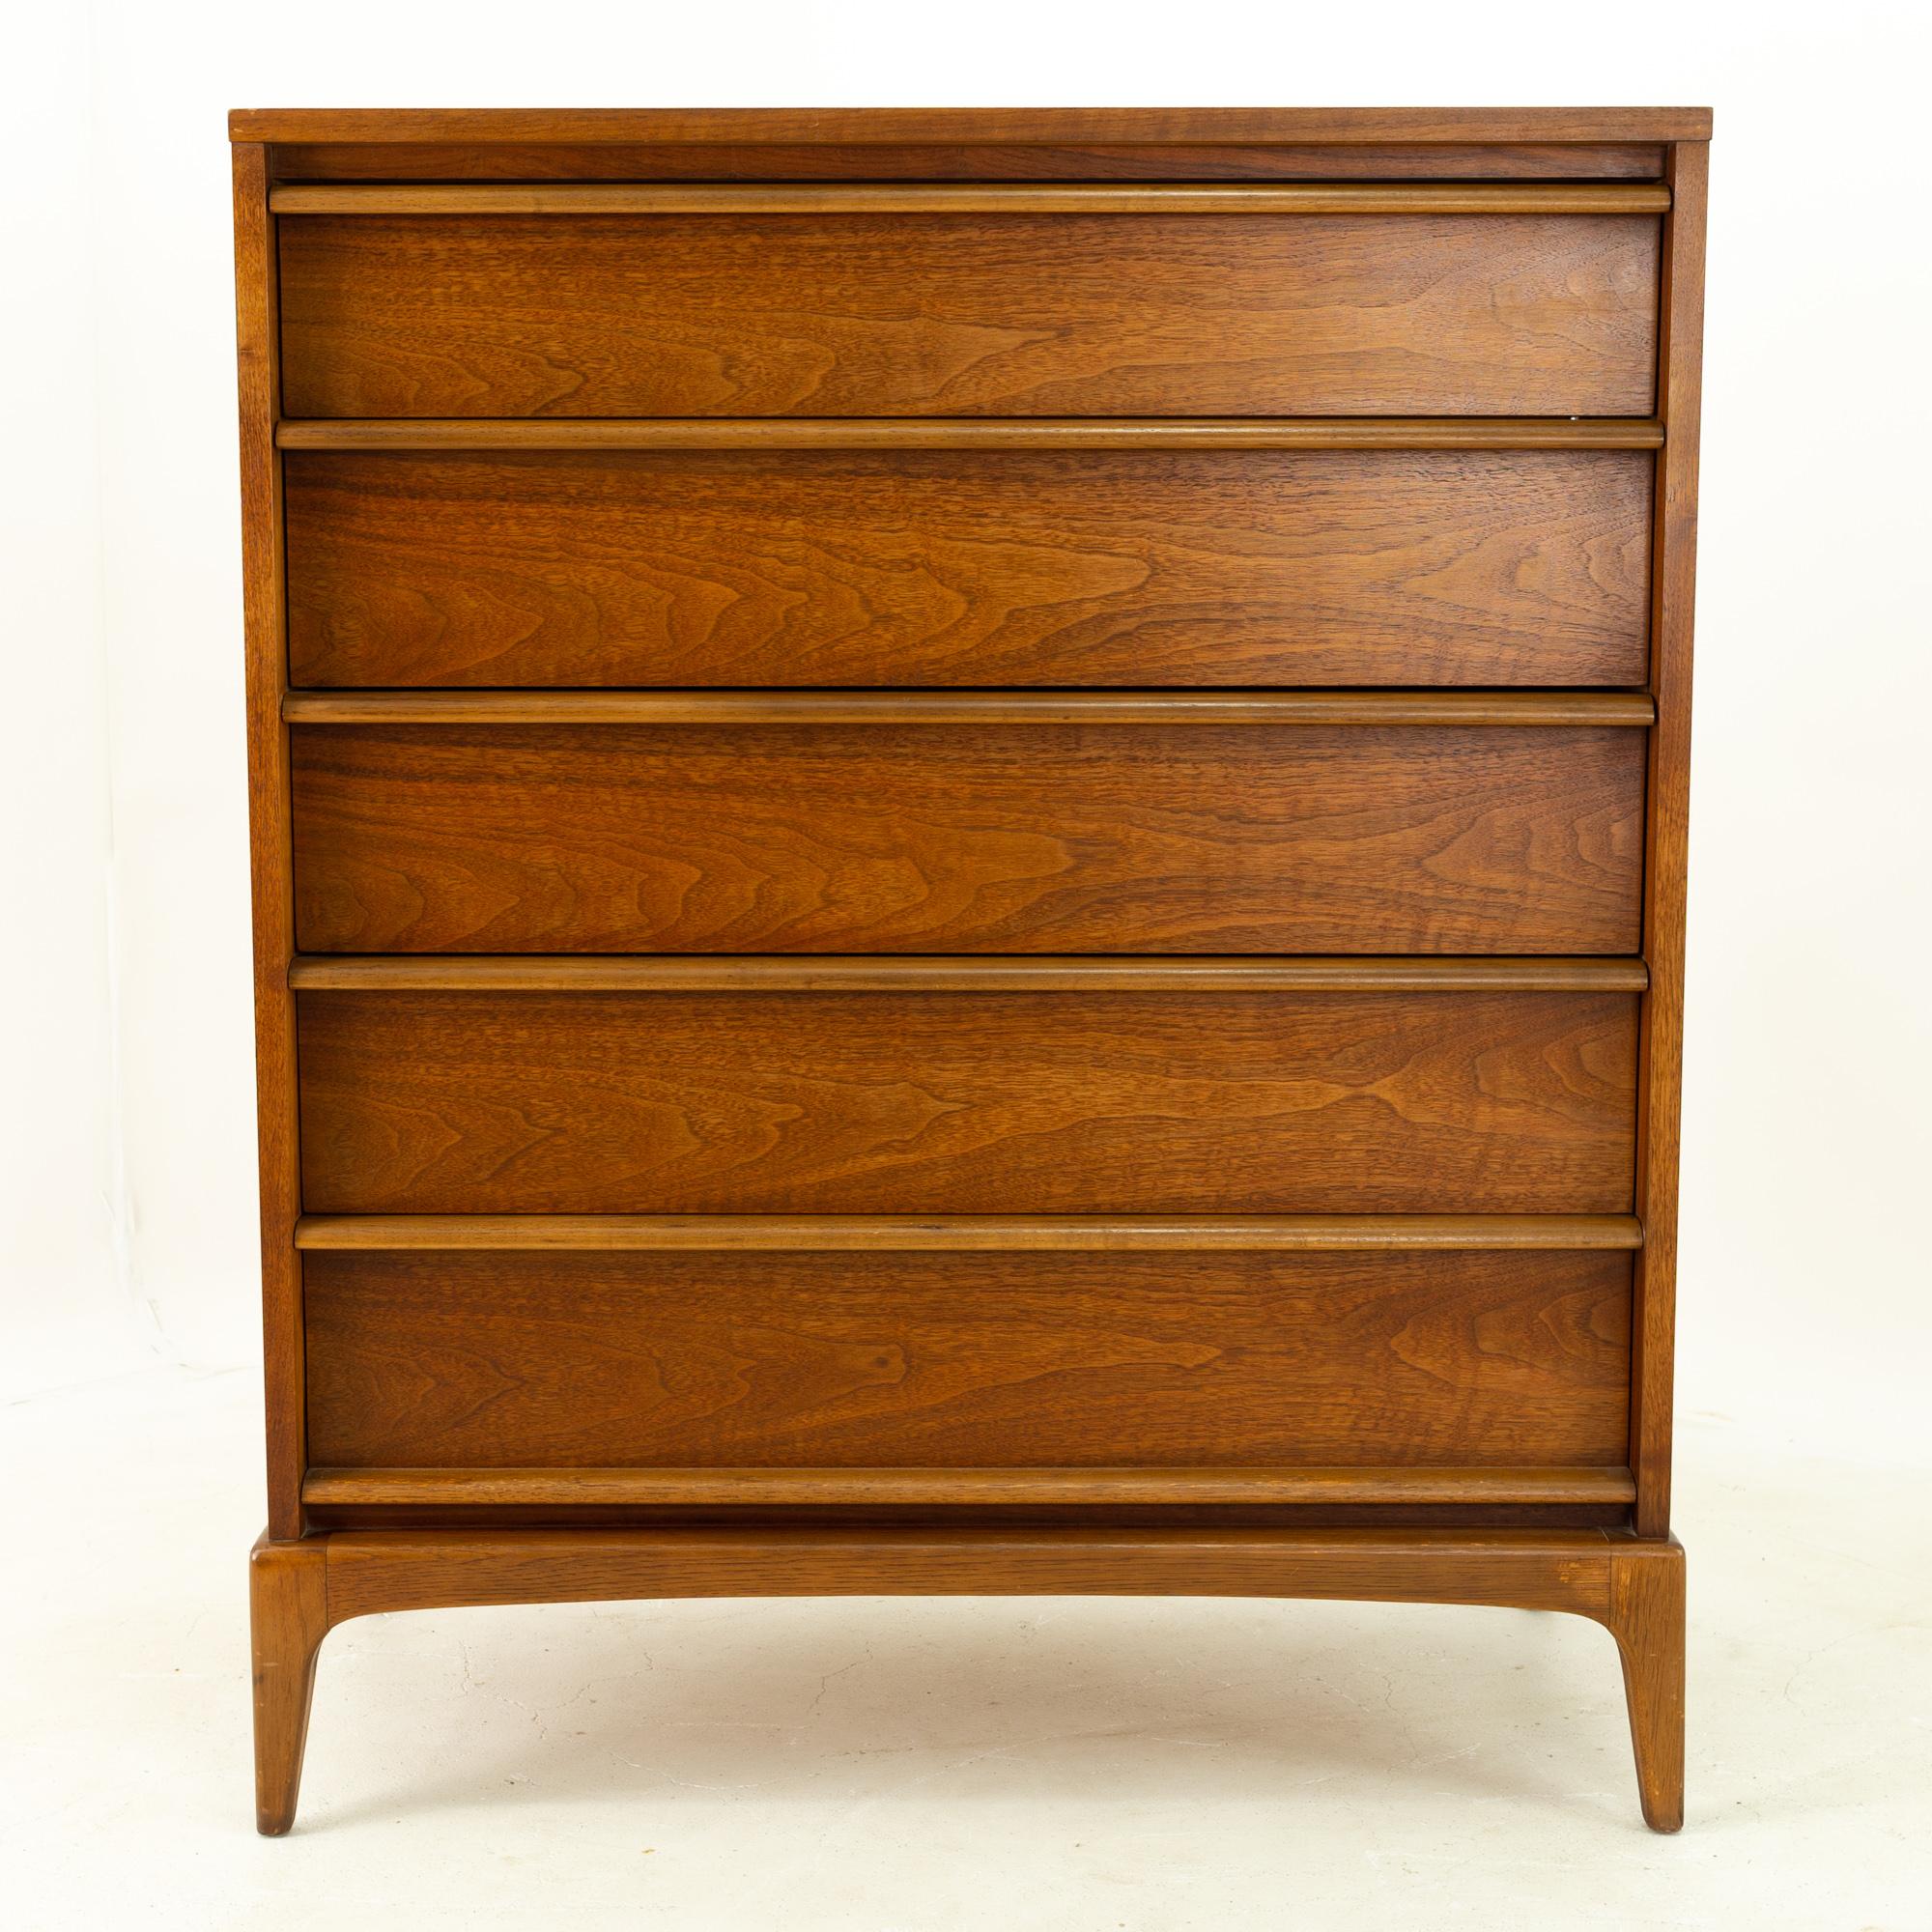 Paul McCobb style Lane Rhythm mid century 5 drawer walnut highboy dresser
Dresser measures 35.5 wide x 18 deep x 43.75 high

All pieces of furniture can be had in what we call restored vintage condition. That means the piece is restored upon